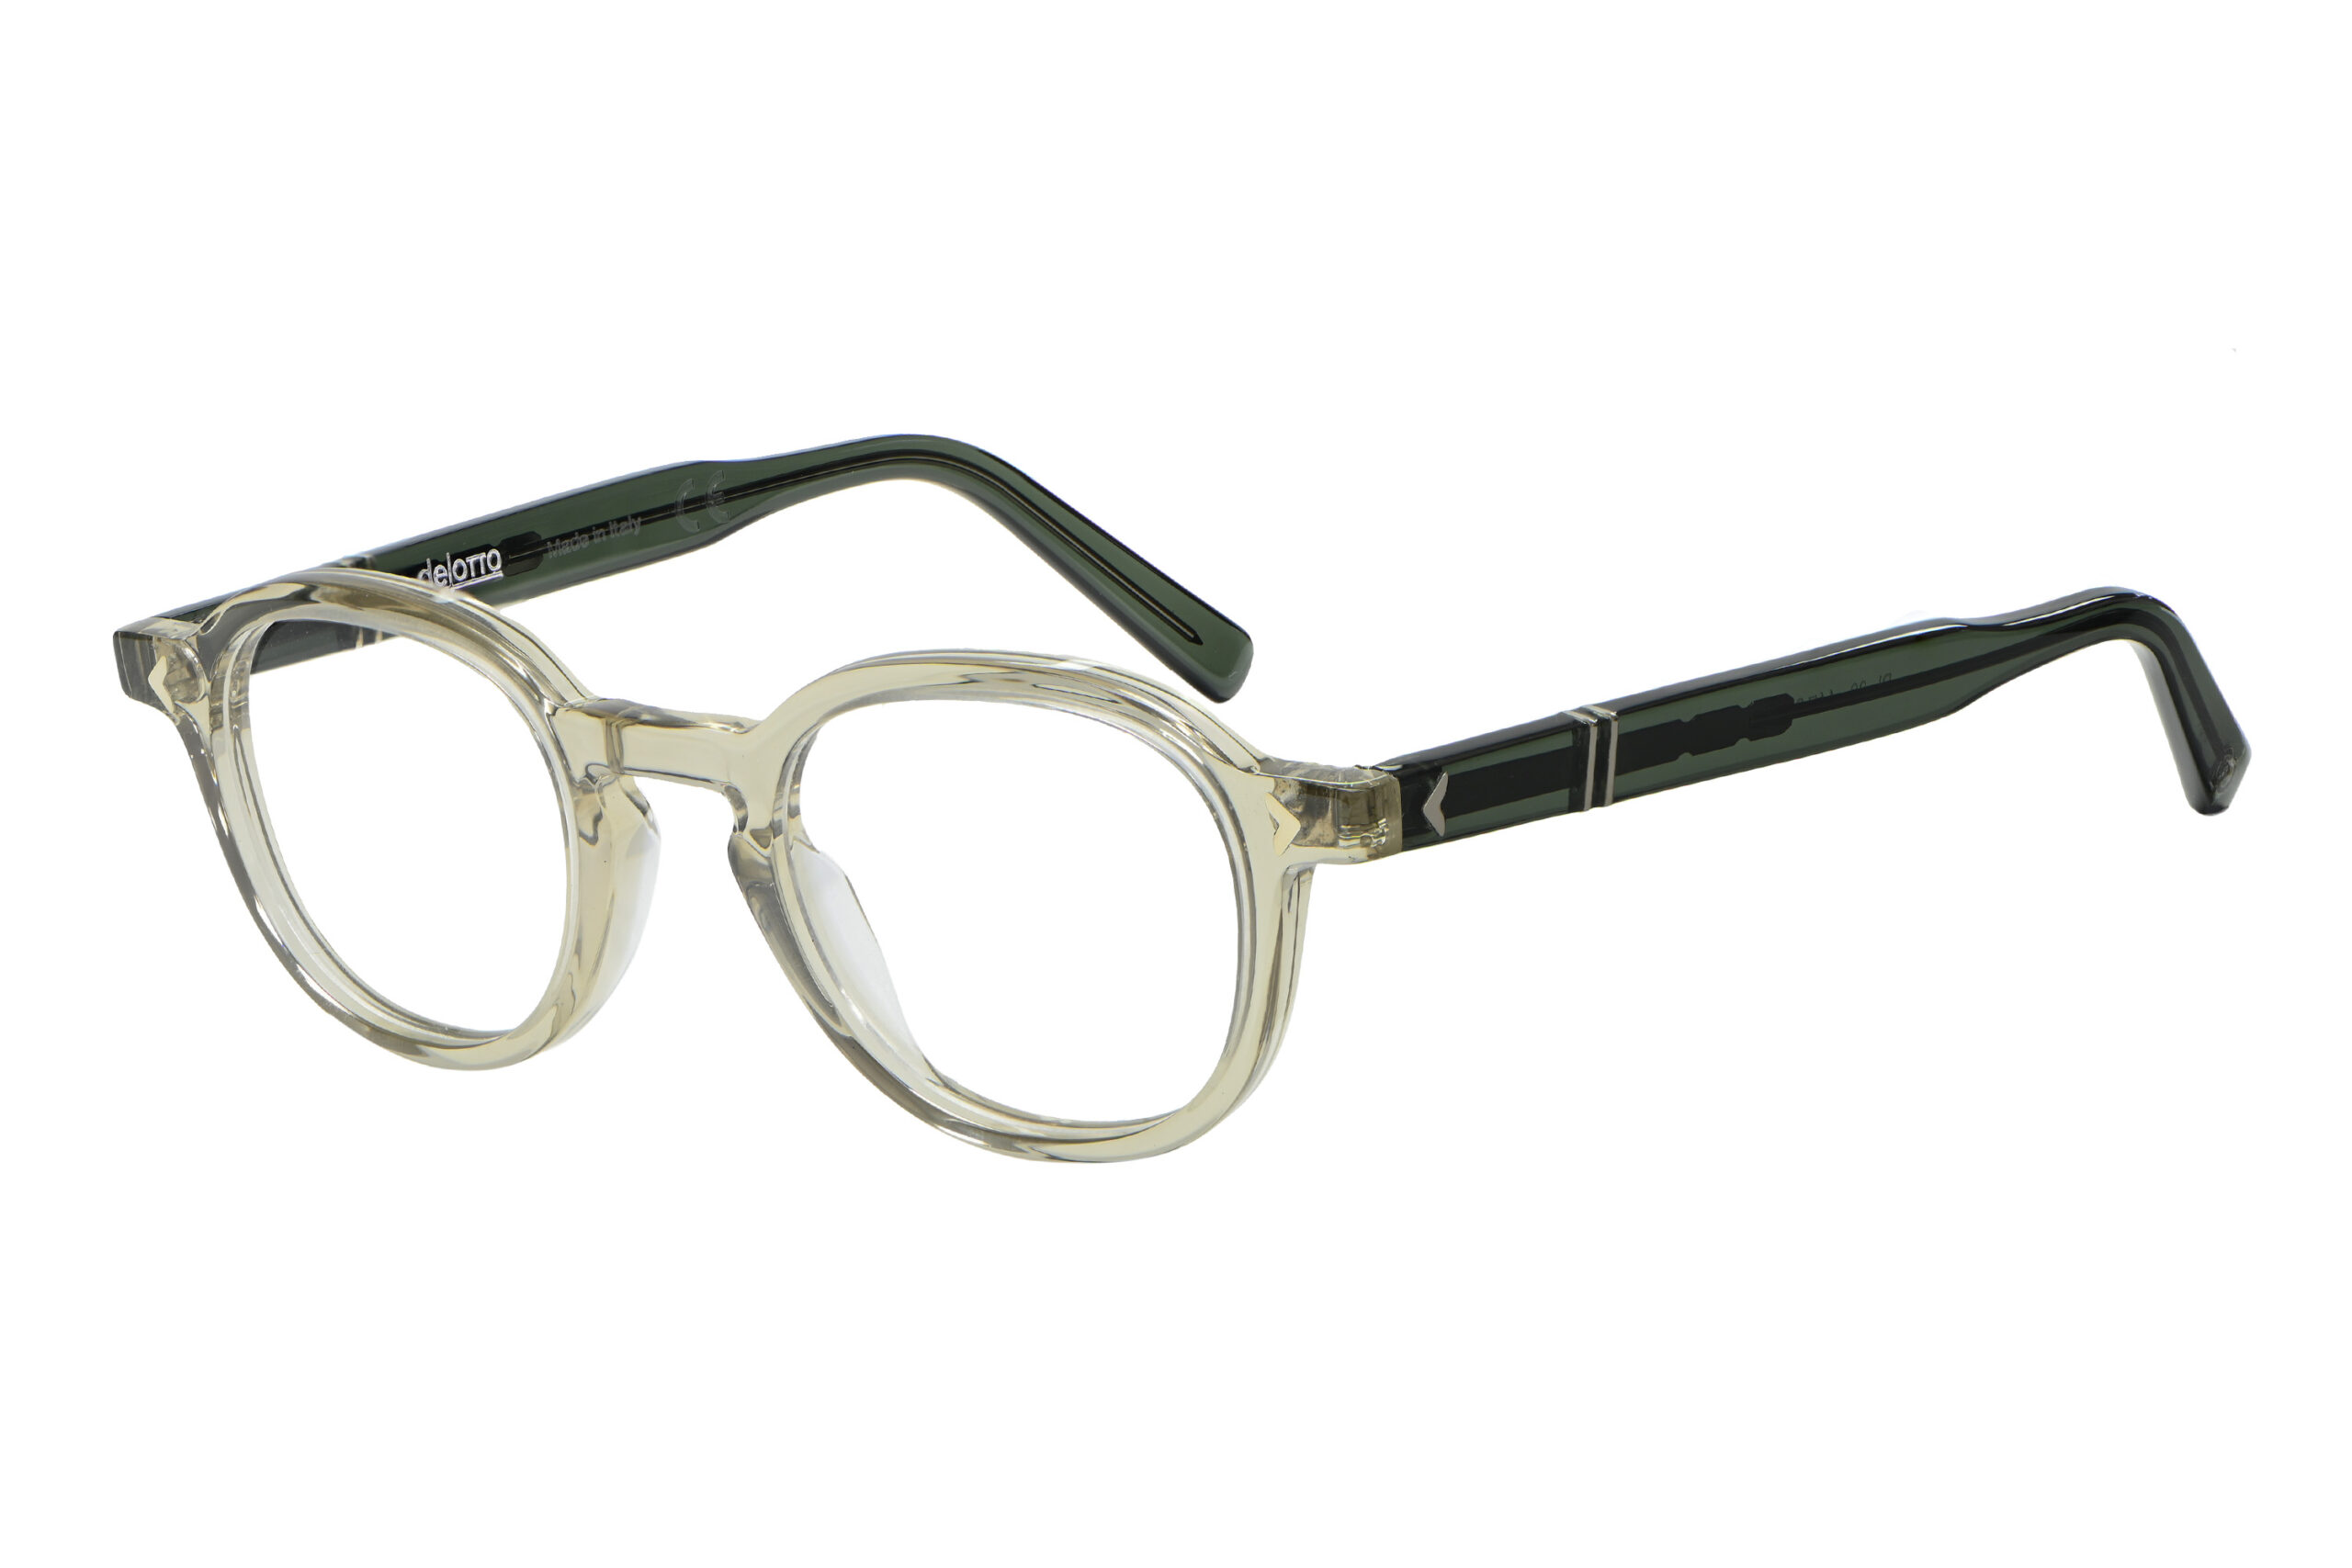 DL99 c.8038 – Translucent sage front with green-grey temples